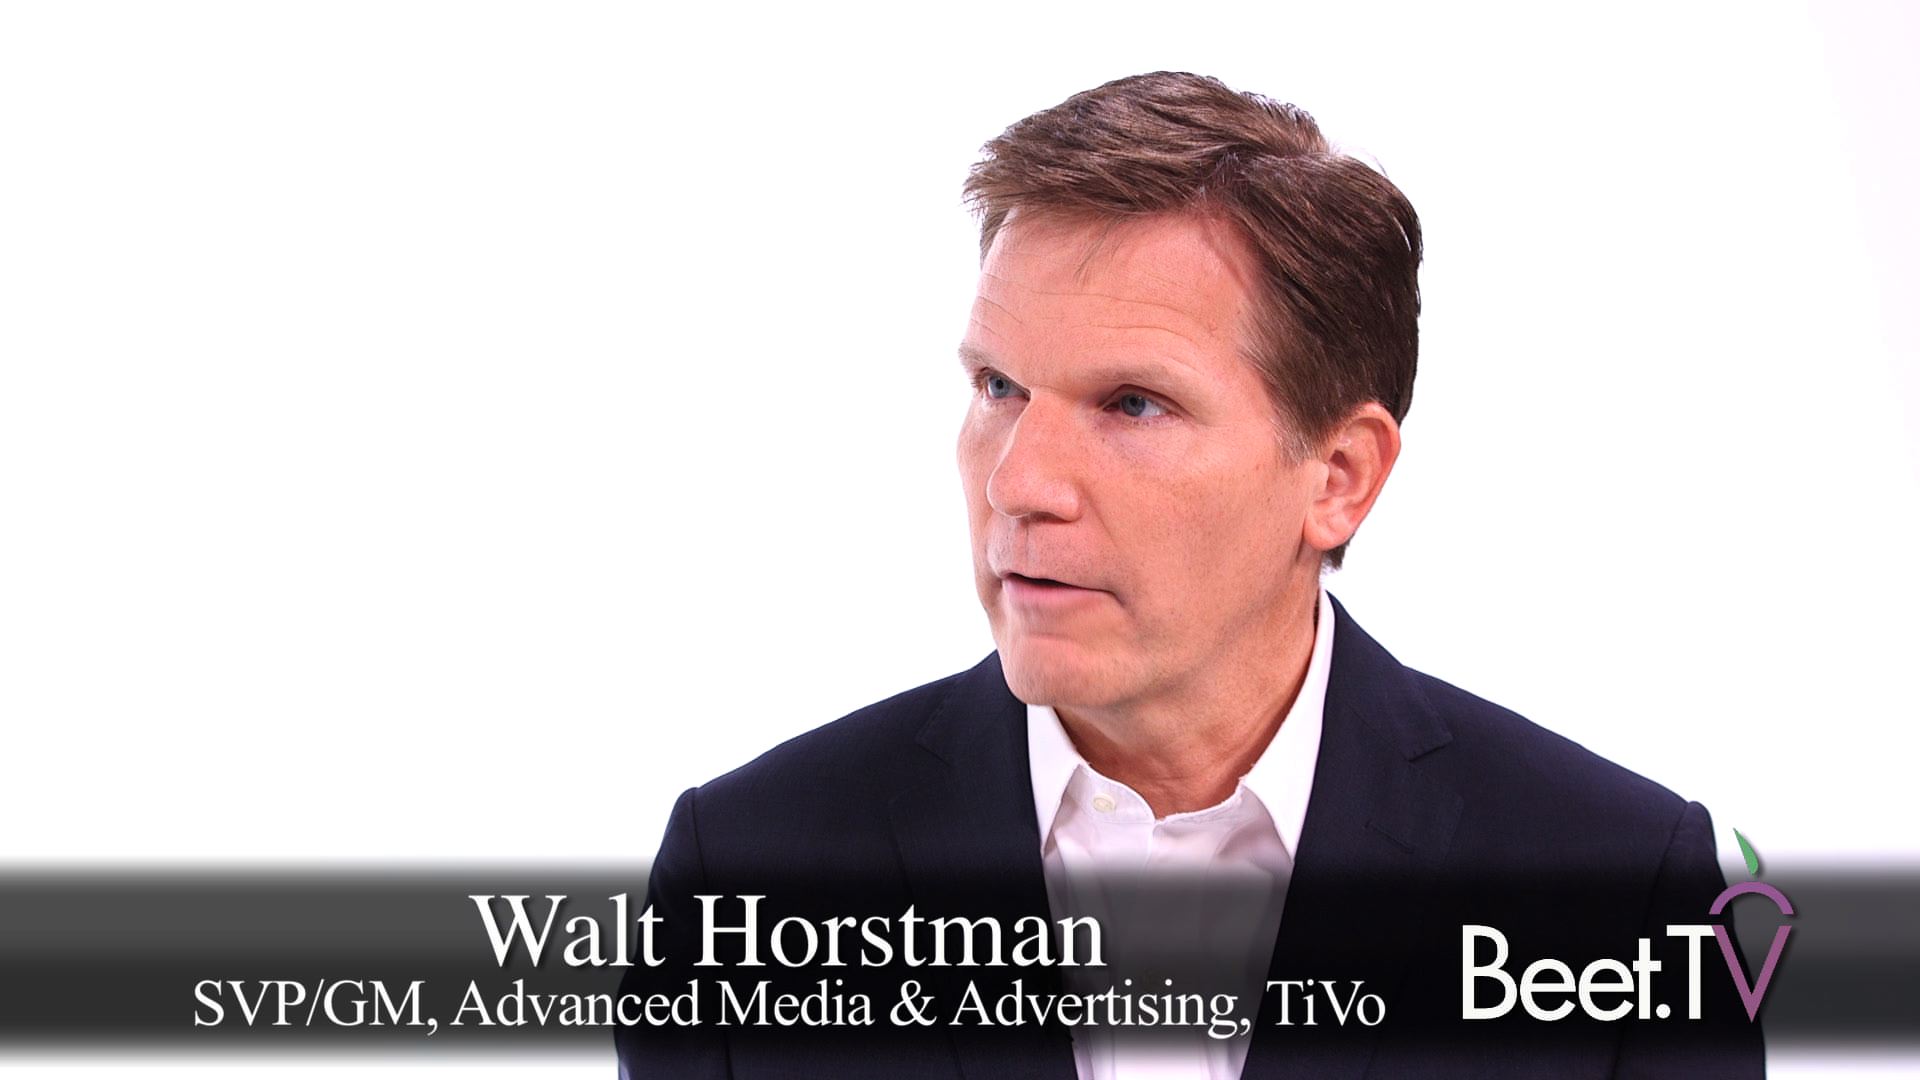 Set-Top Box Data ‘Must Move At The Speed Of Digital’: TiVo’s Horstman